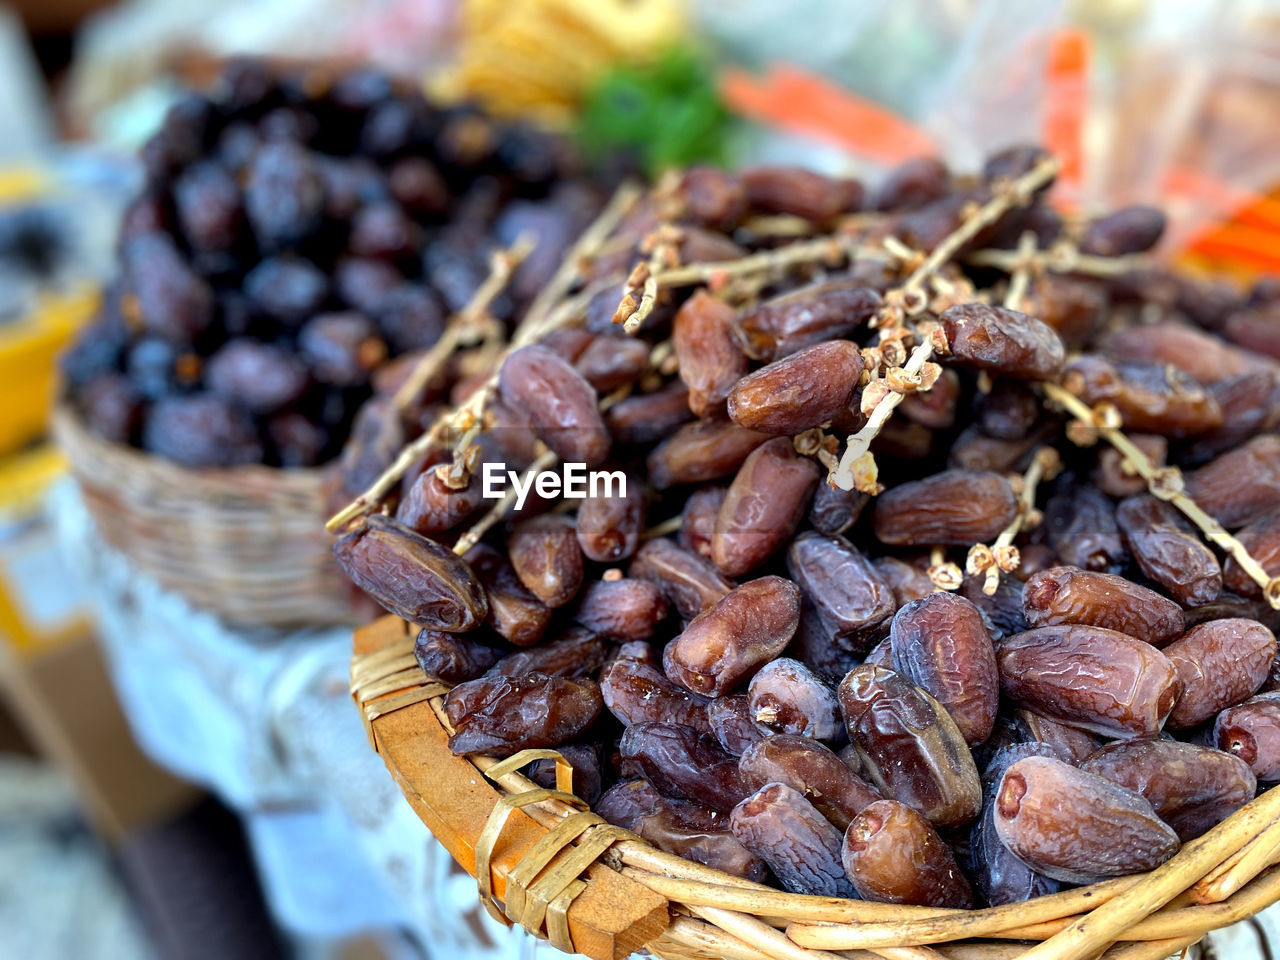 The best dates of israel 